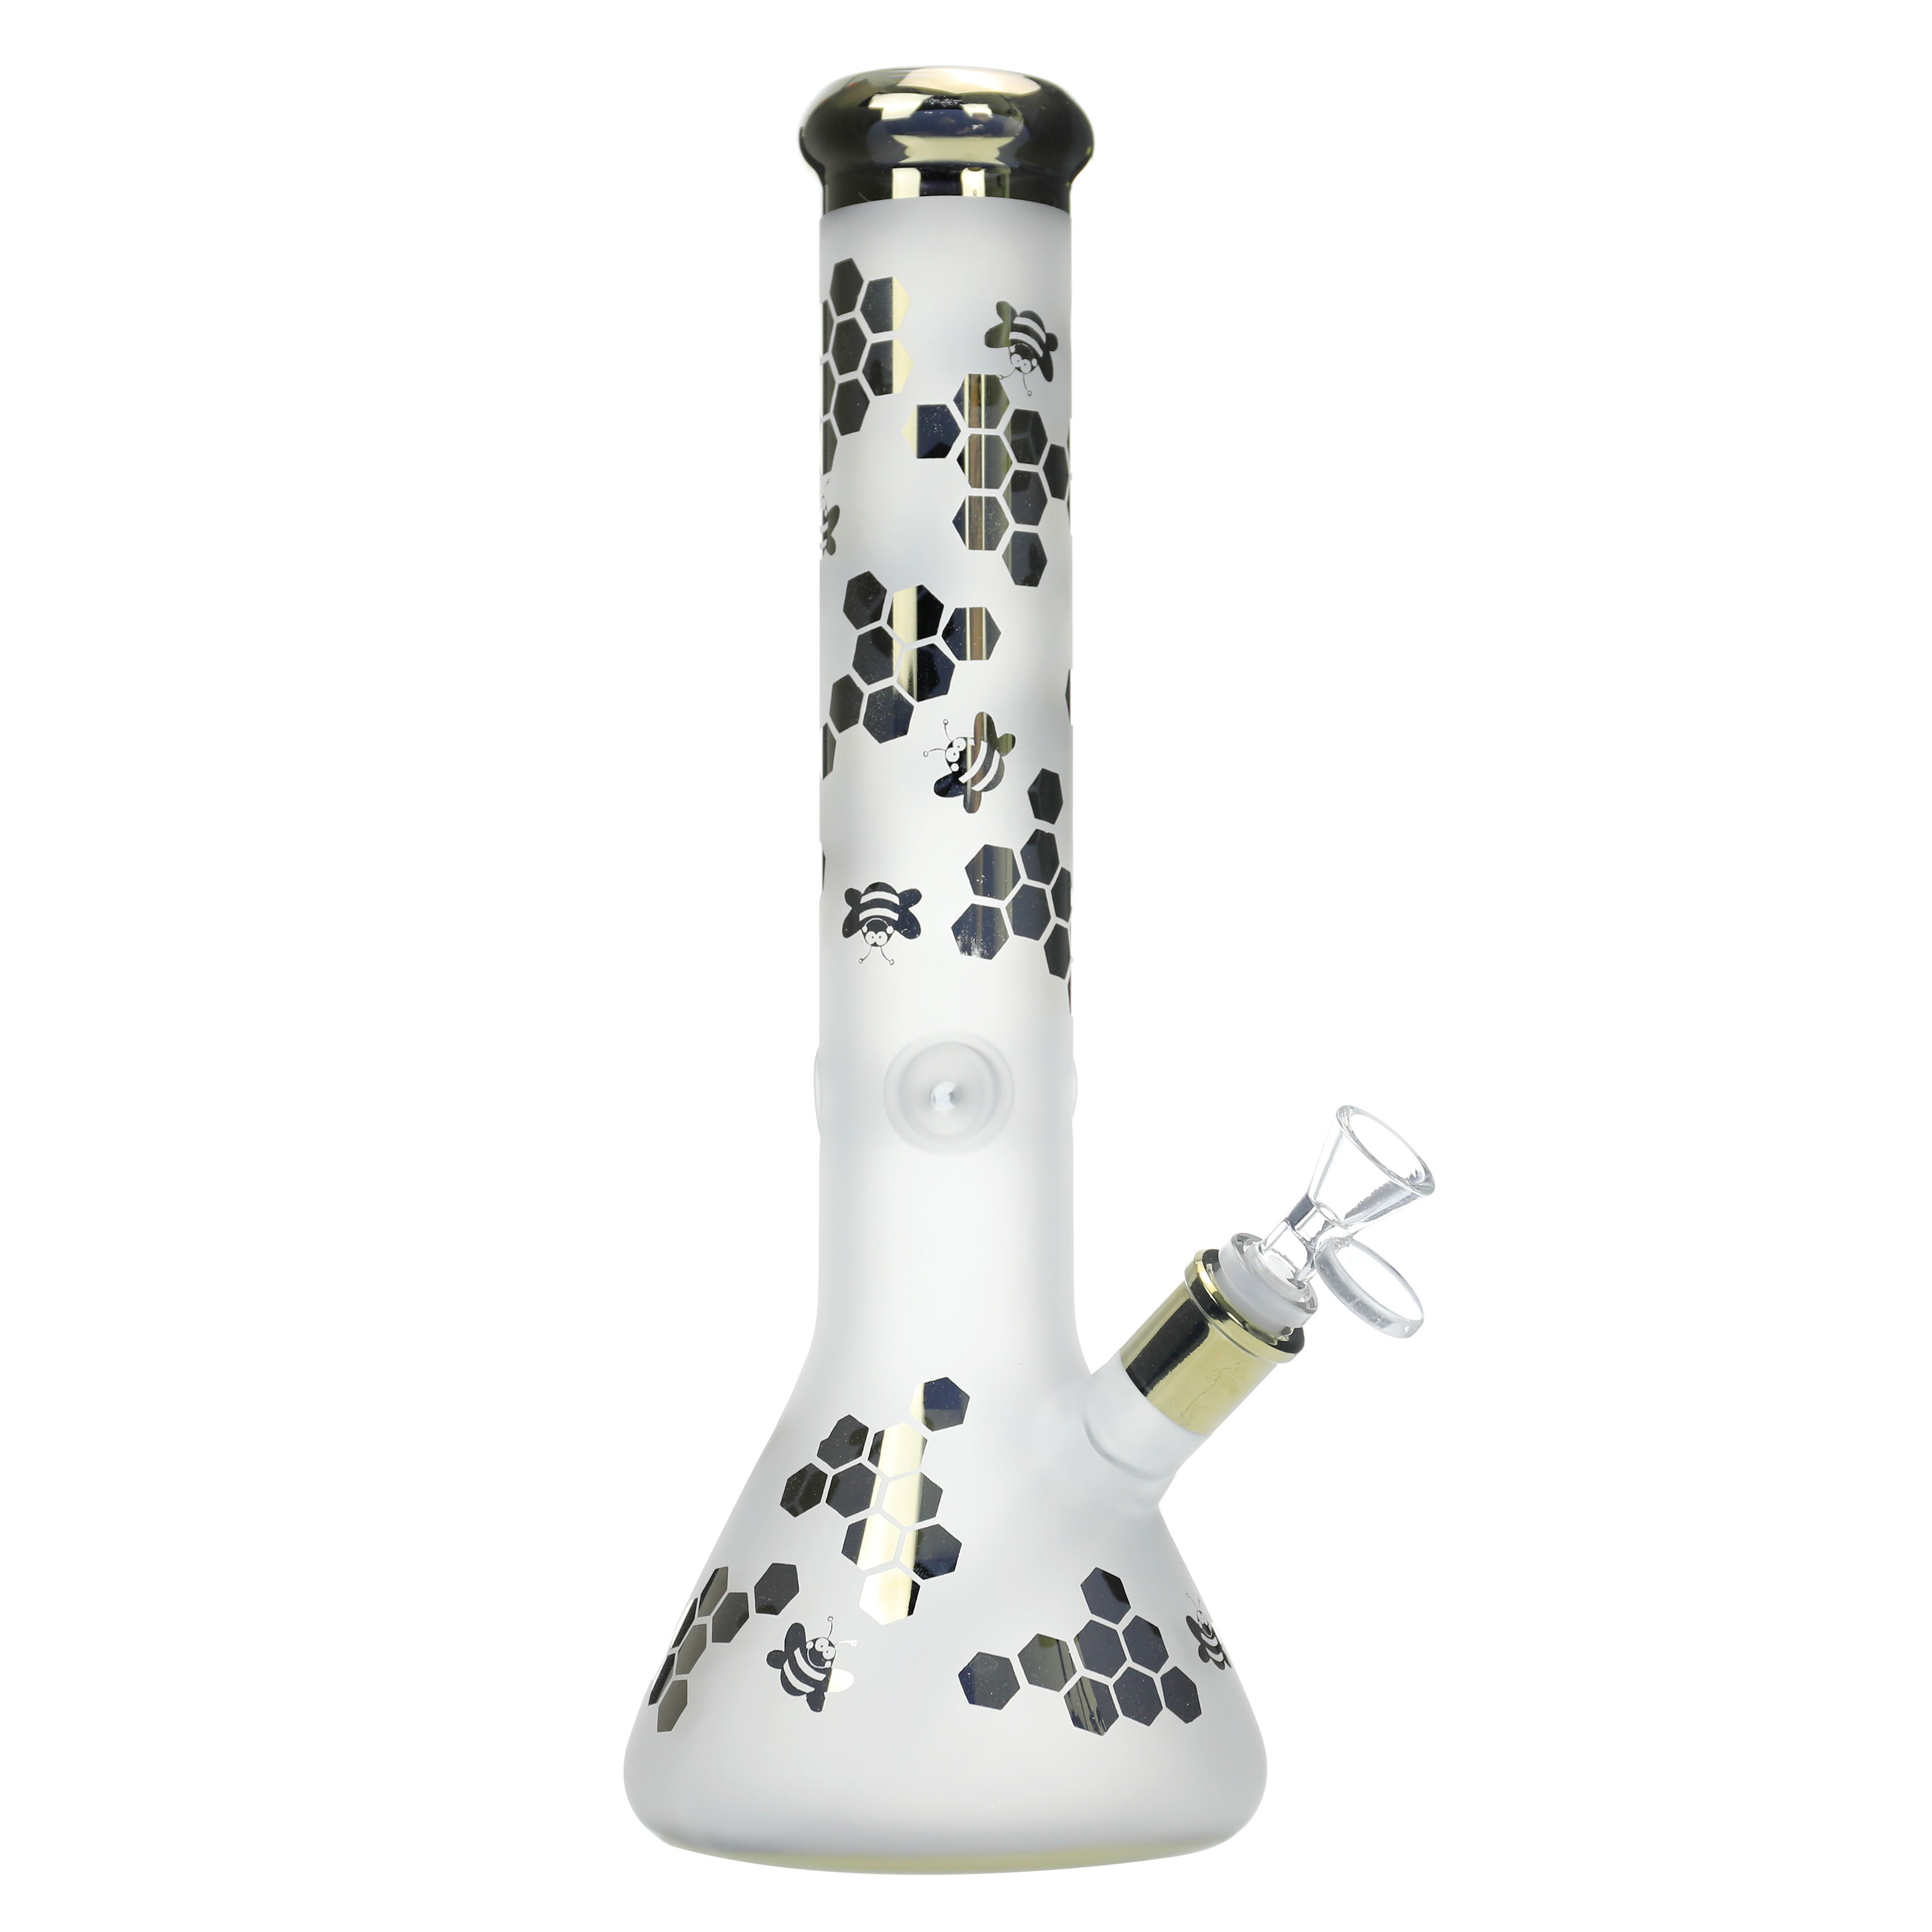 Chill-Glass-Water-Pipe-JLC-77